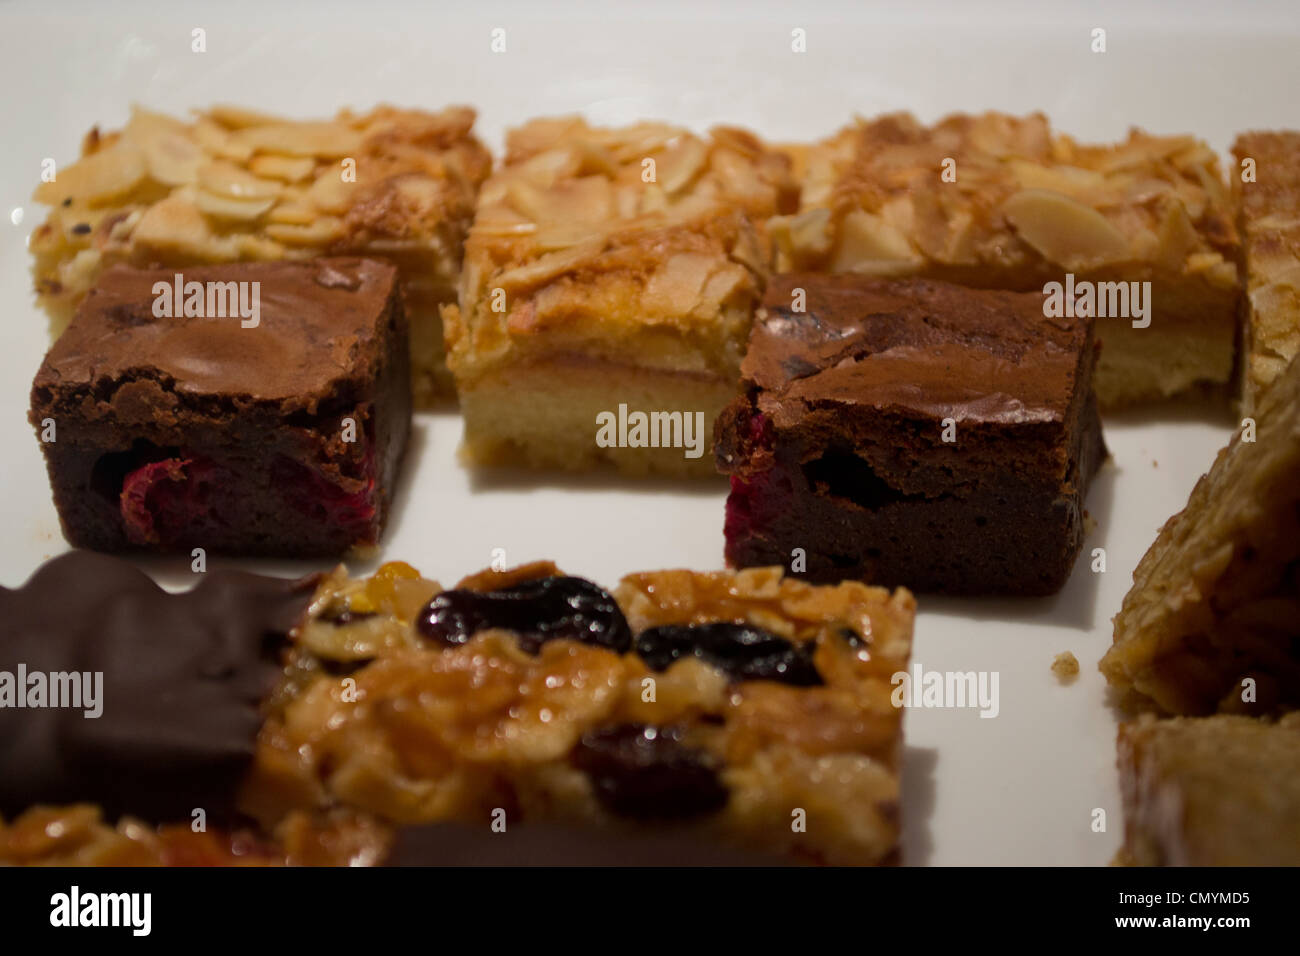 A plate of home-made flapjacks and other treats. Stock Photo